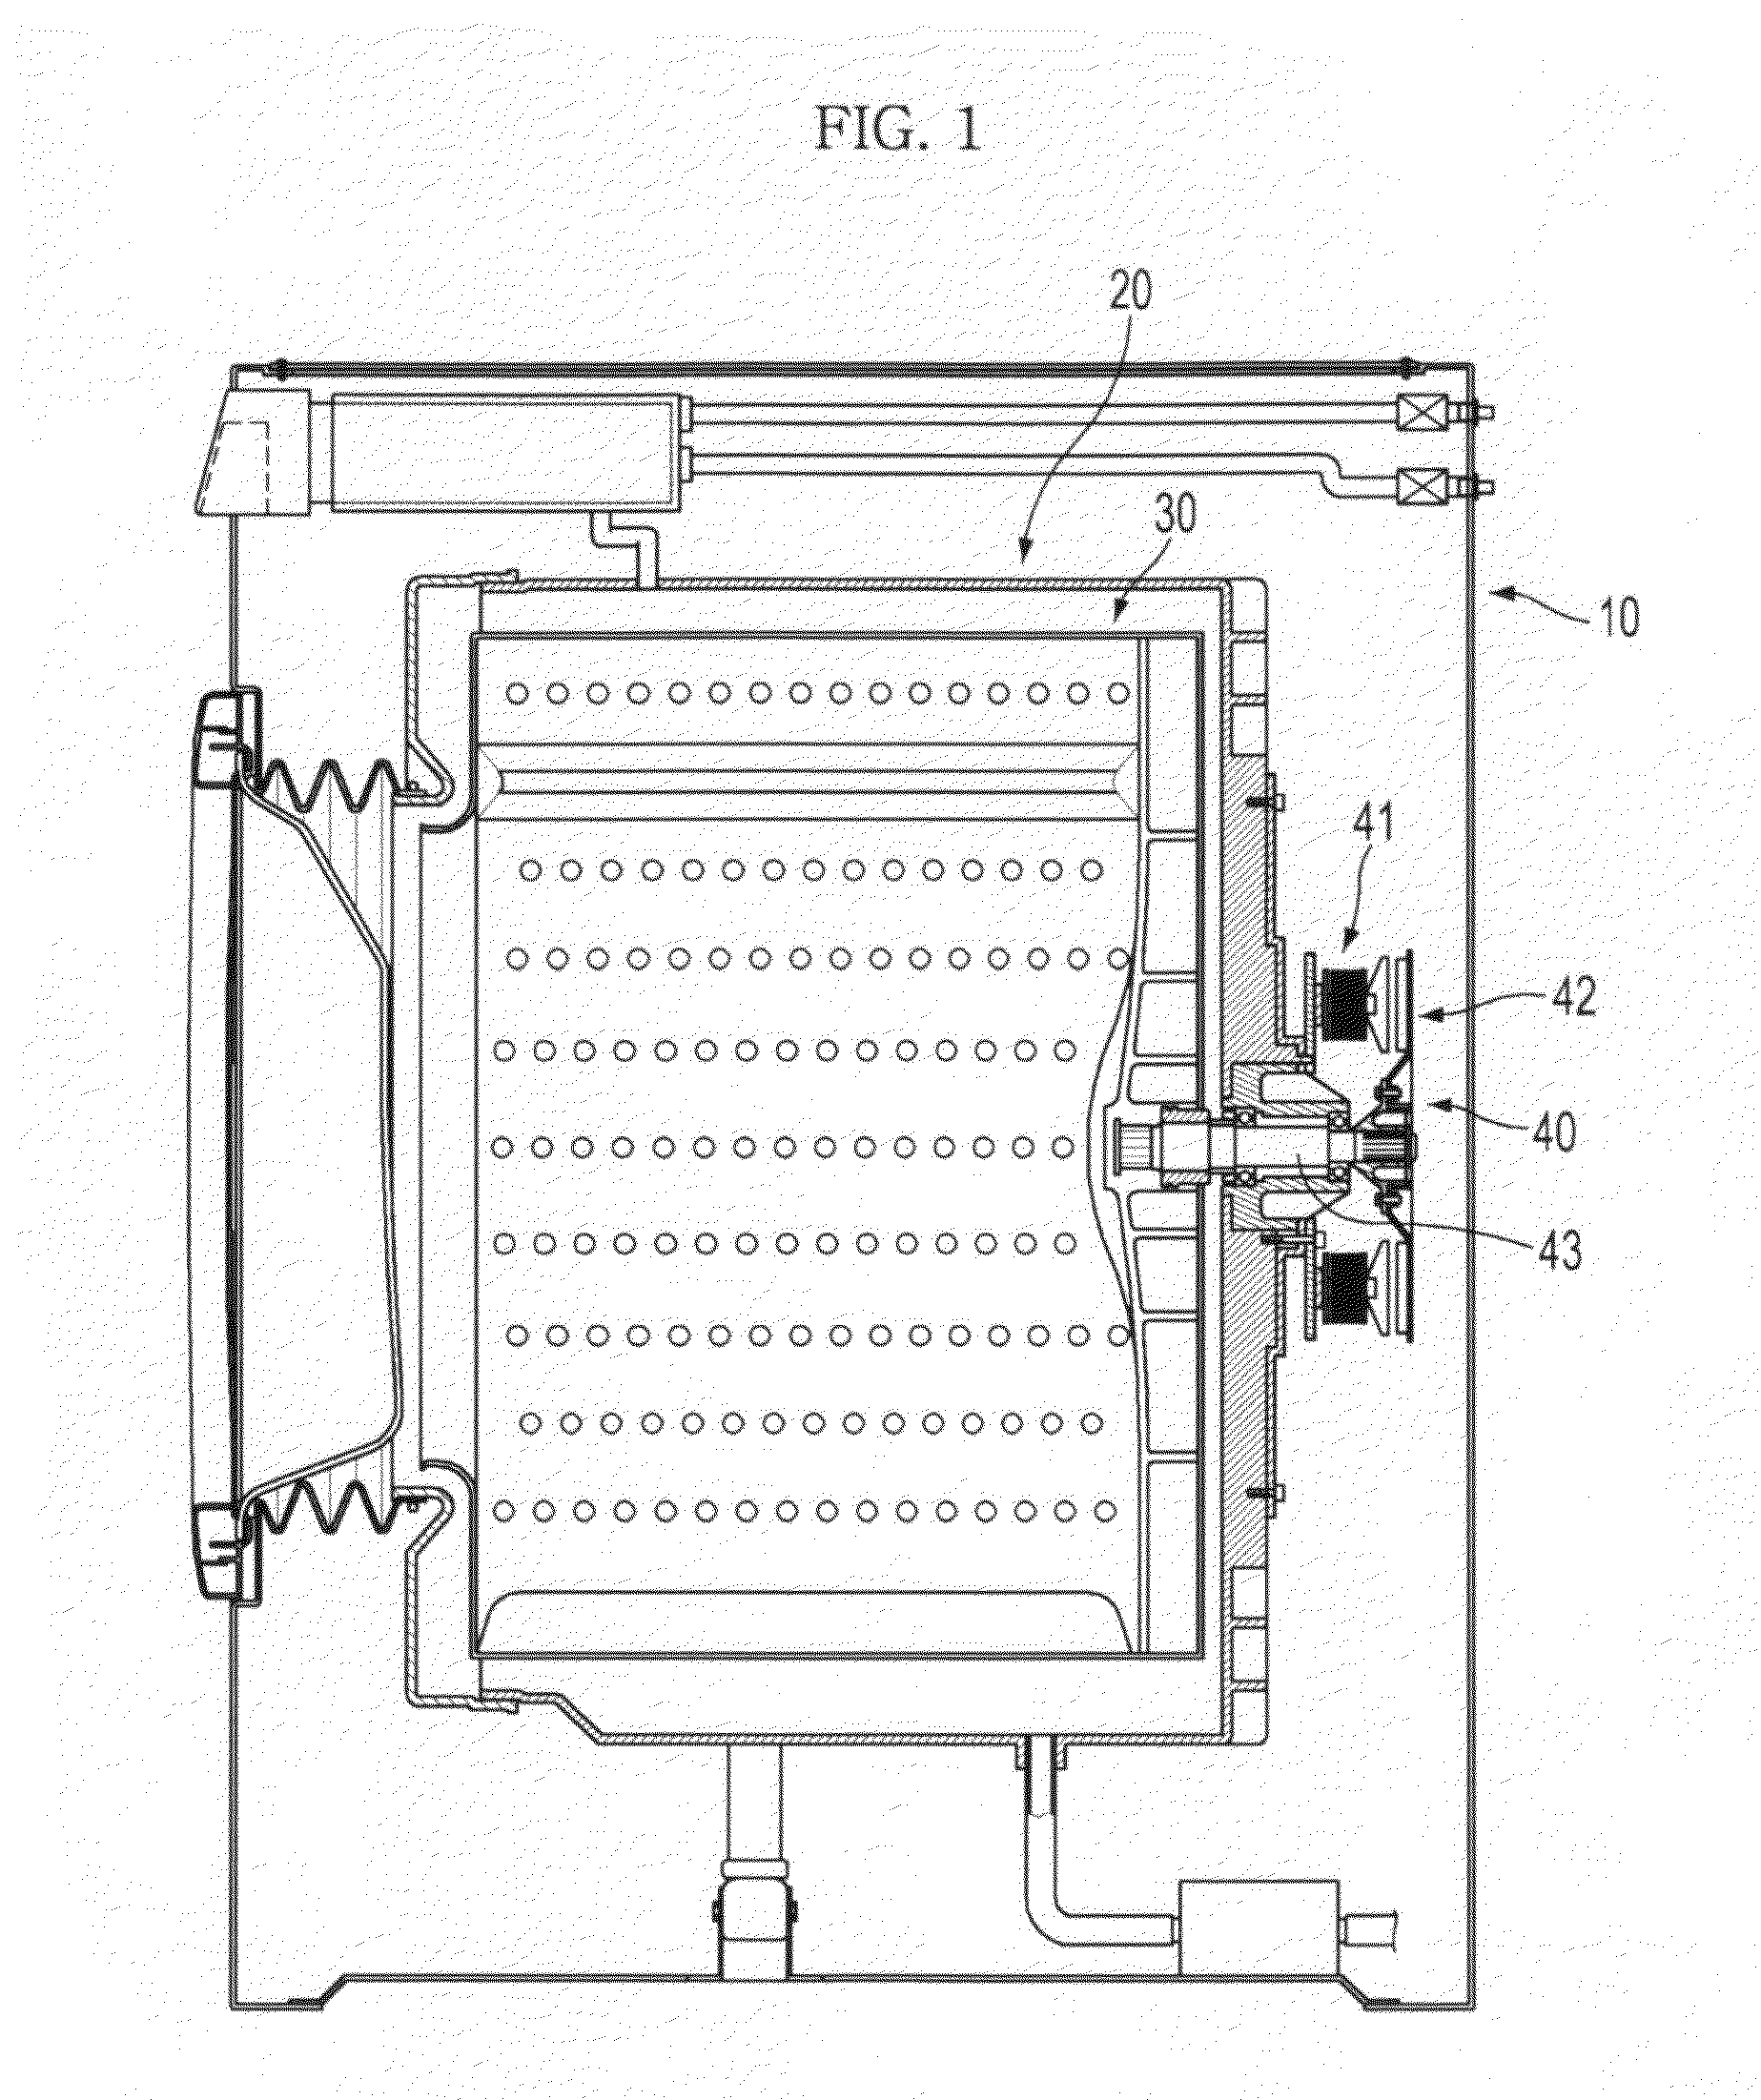 Motor, method of manufacturing the same, and washing machine having motor manufactured thereby